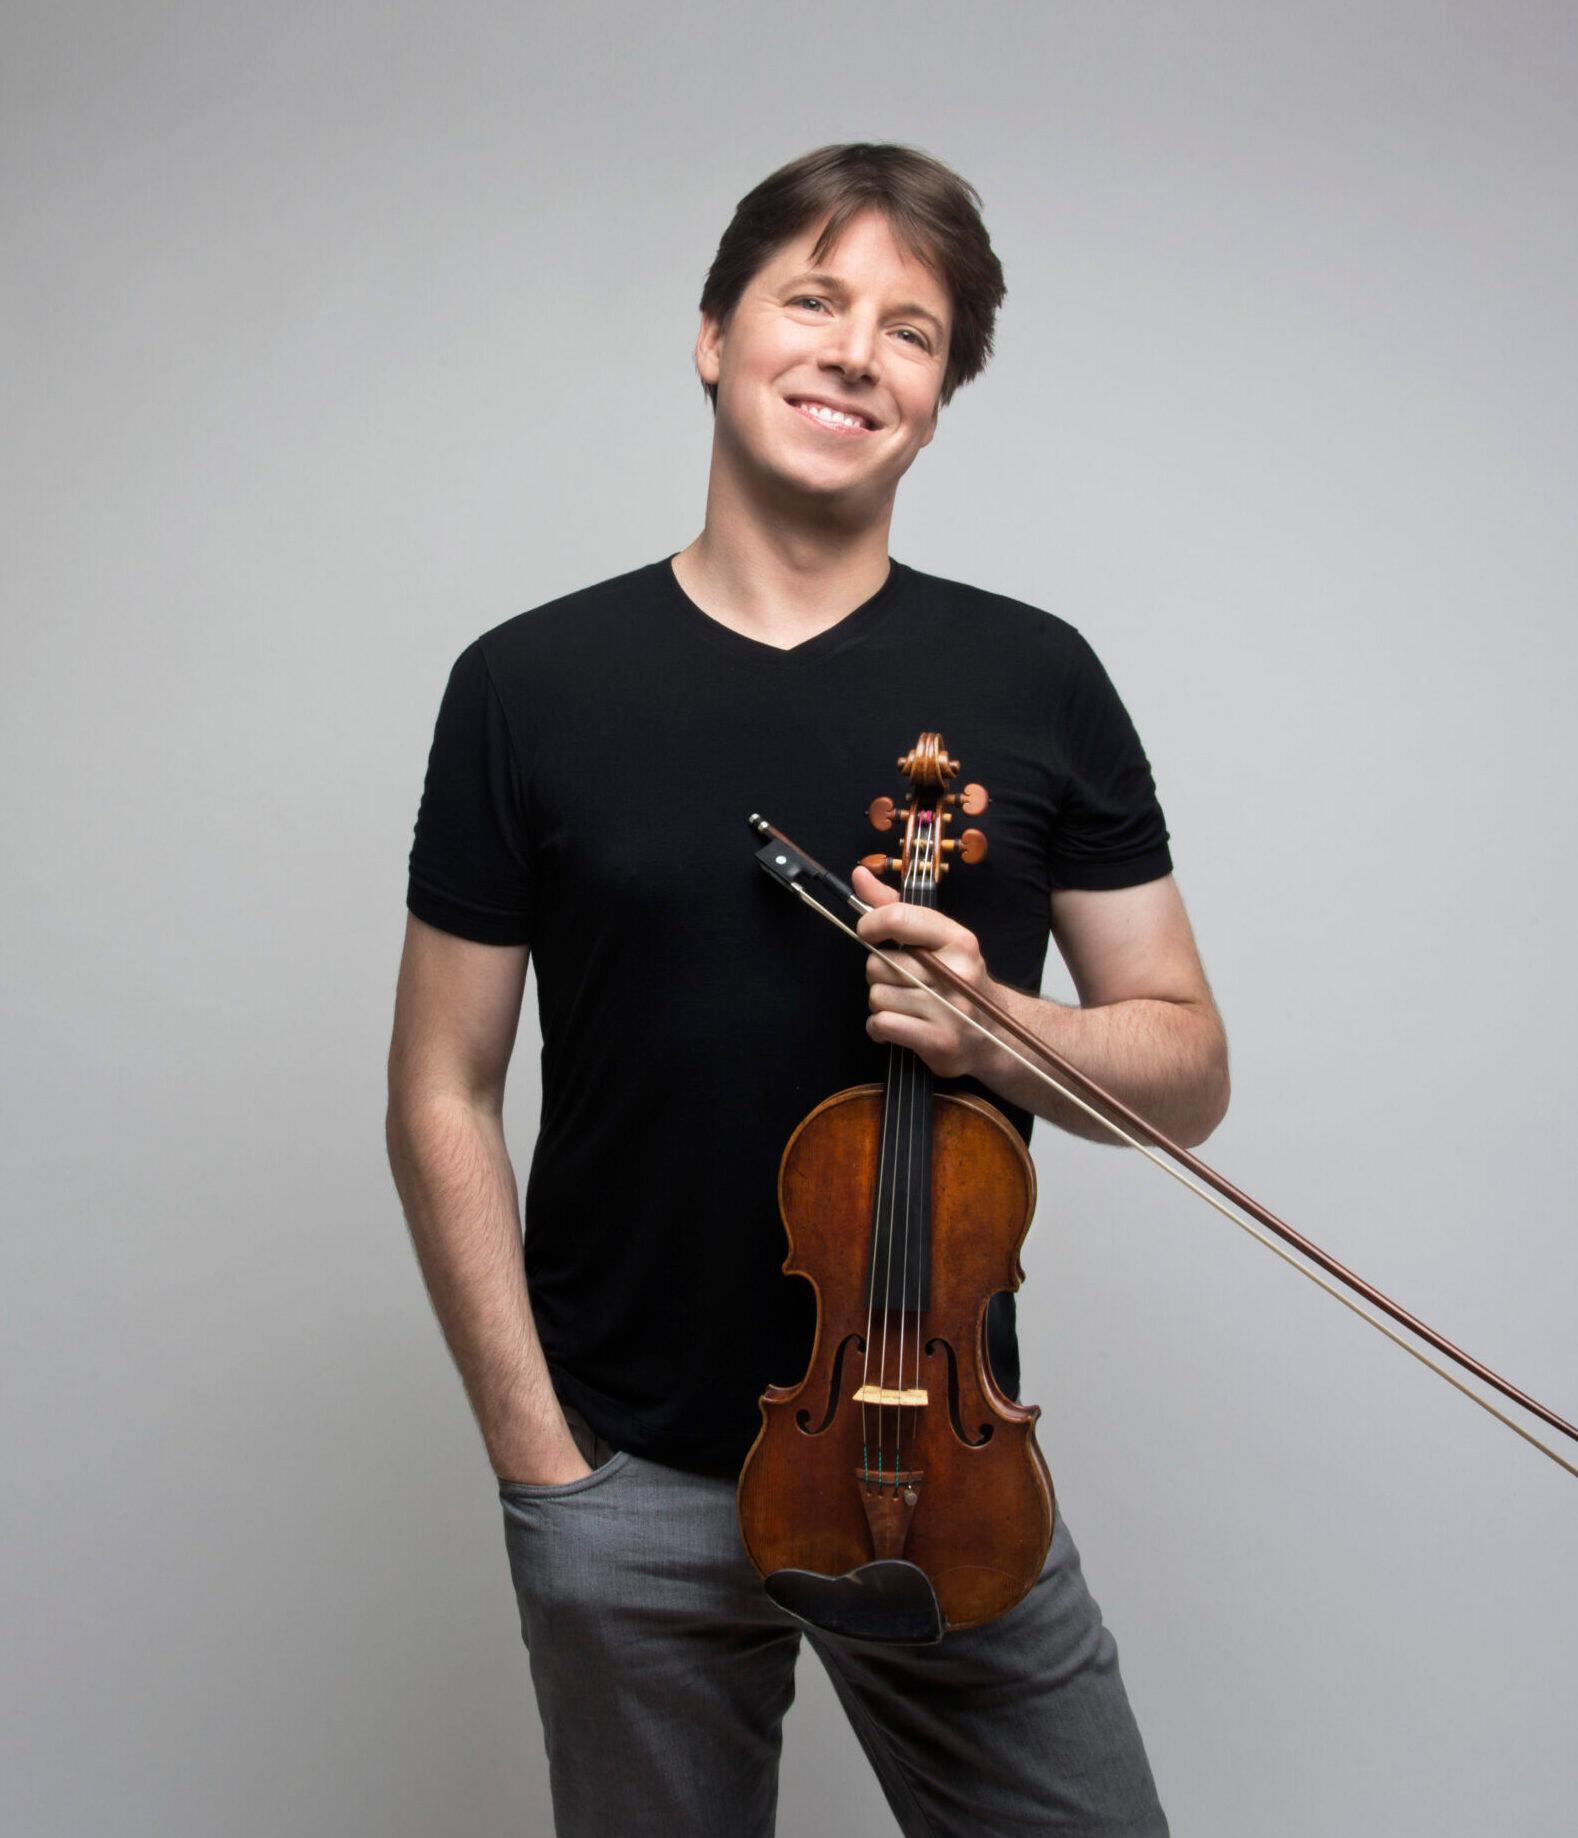 Violinist Joshua Bell standing holding his violin